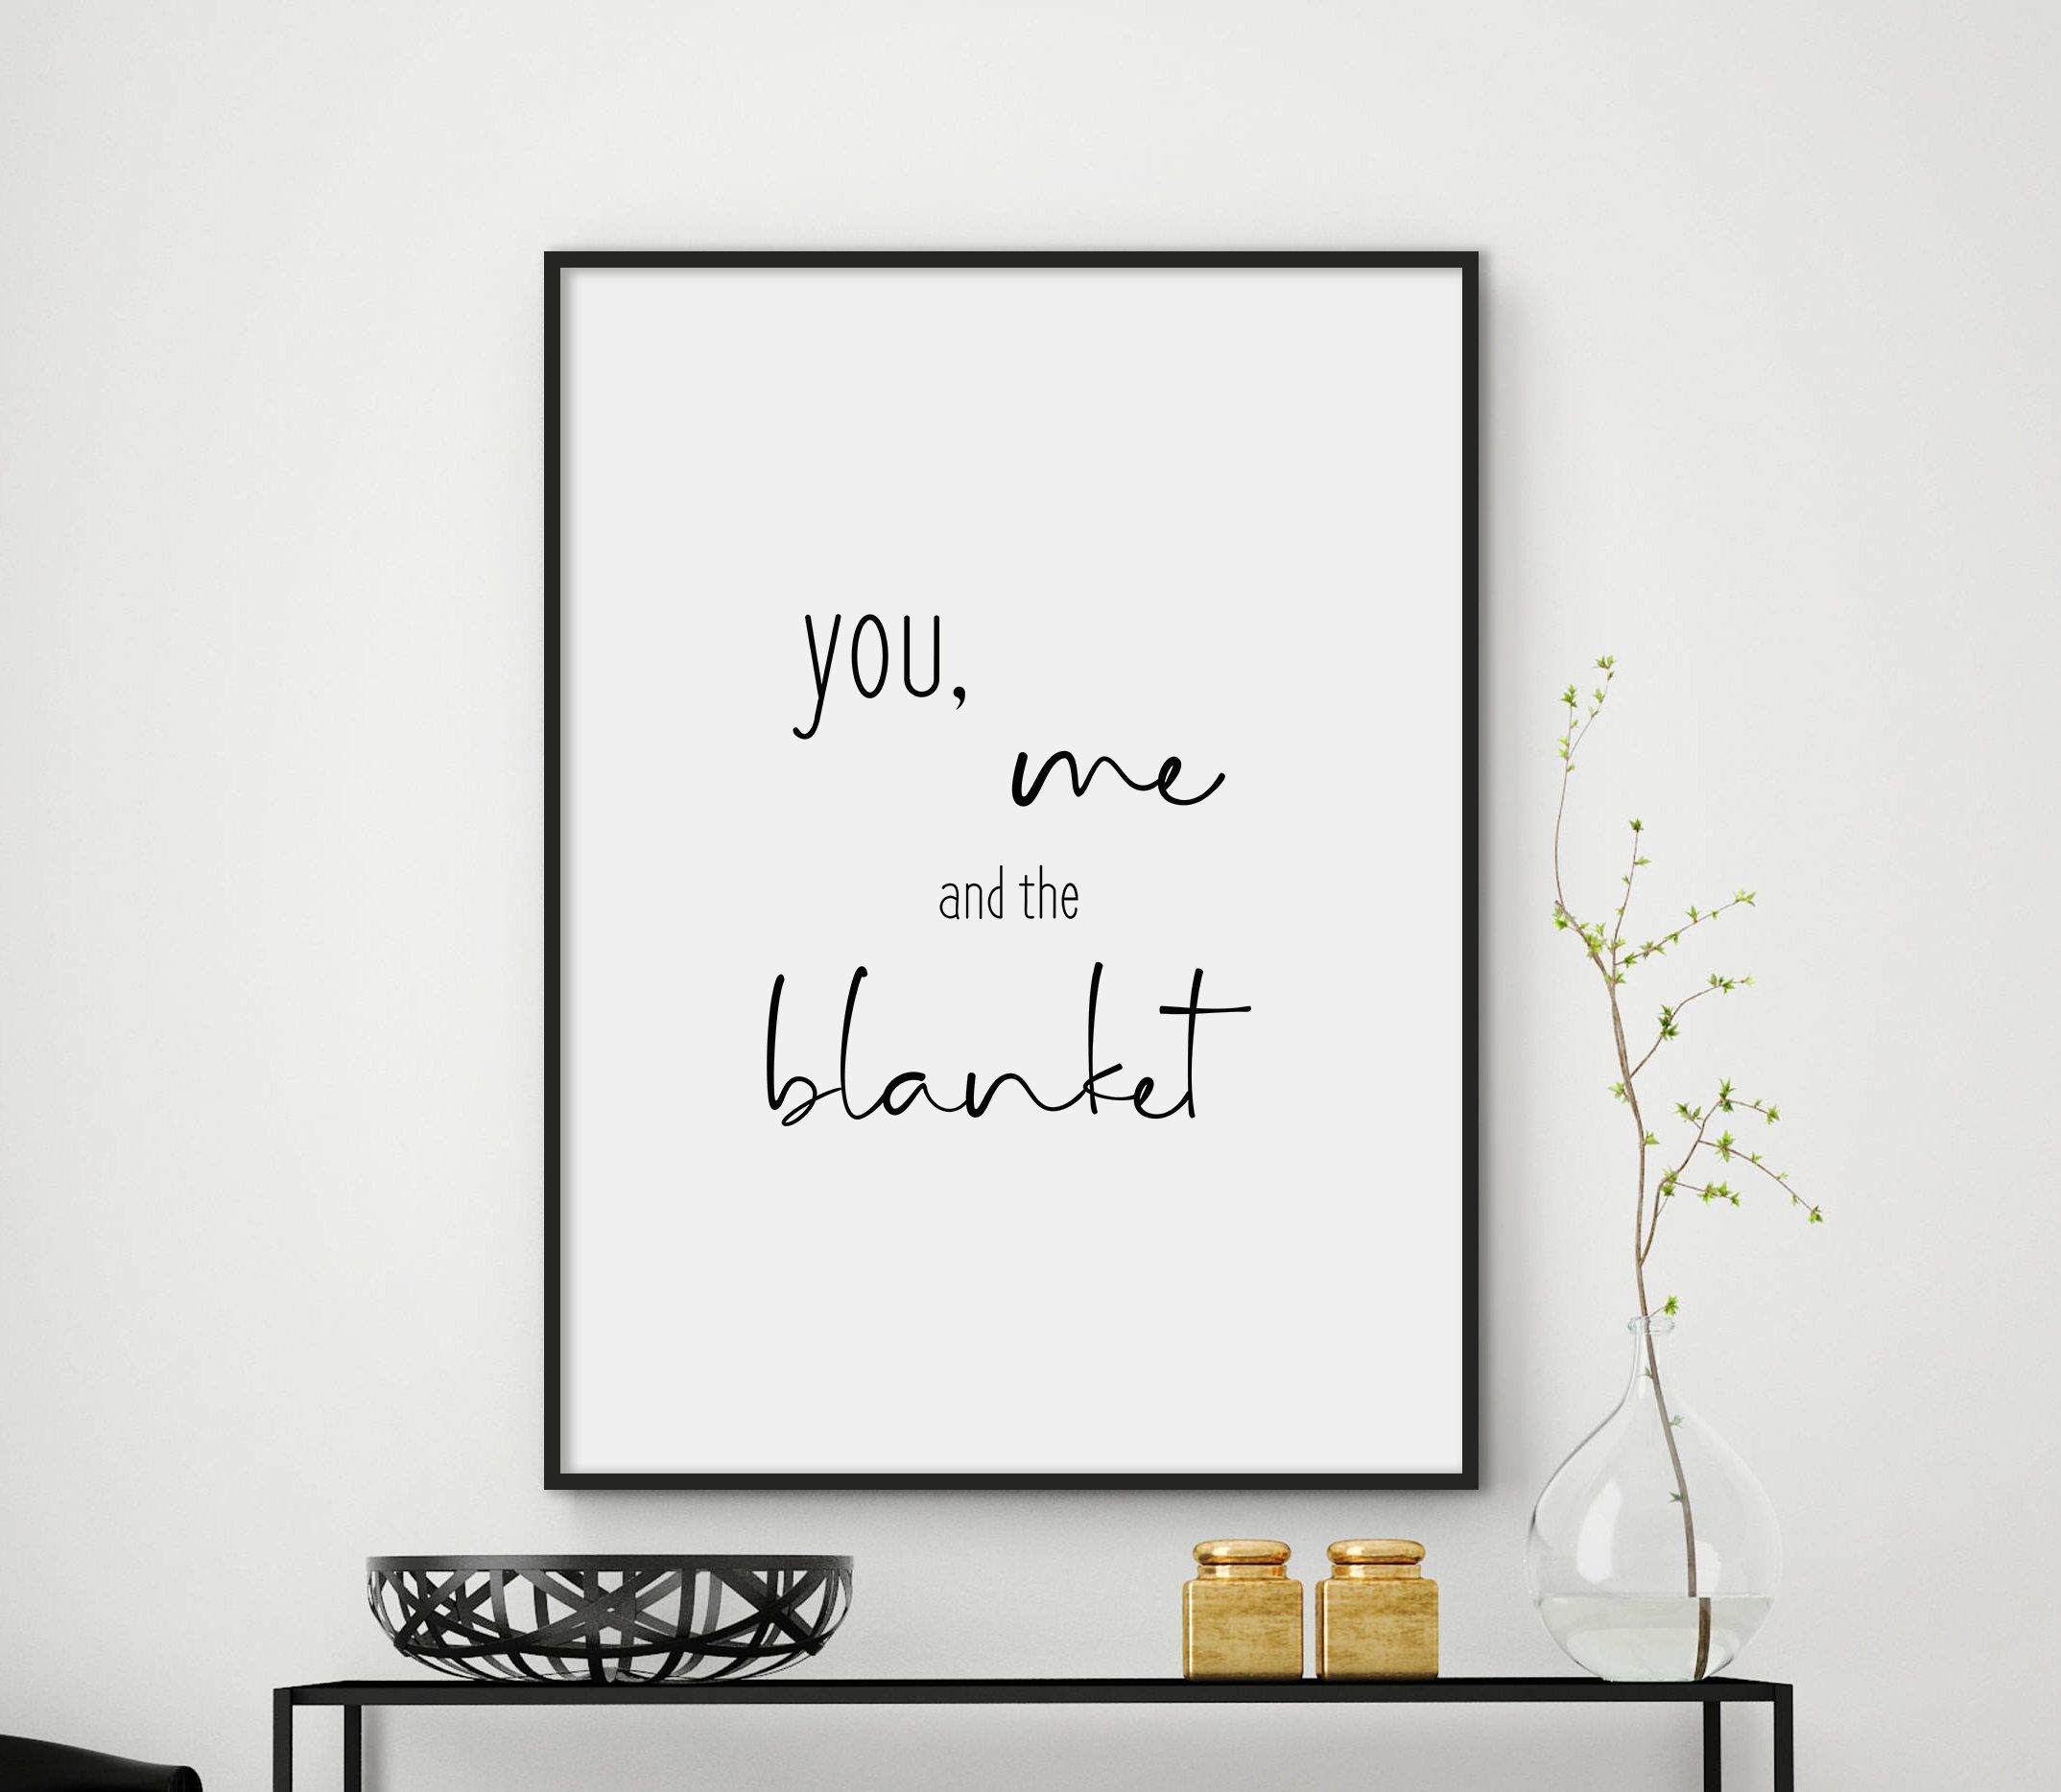 Bedroom Posters Funny Bedroom Wall Decor Funny Quote – Etsy | Funny Wall  Art Quotes, Funny Bedroom, Funny Quote Prints With Funny Quote Wall Art (View 9 of 15)